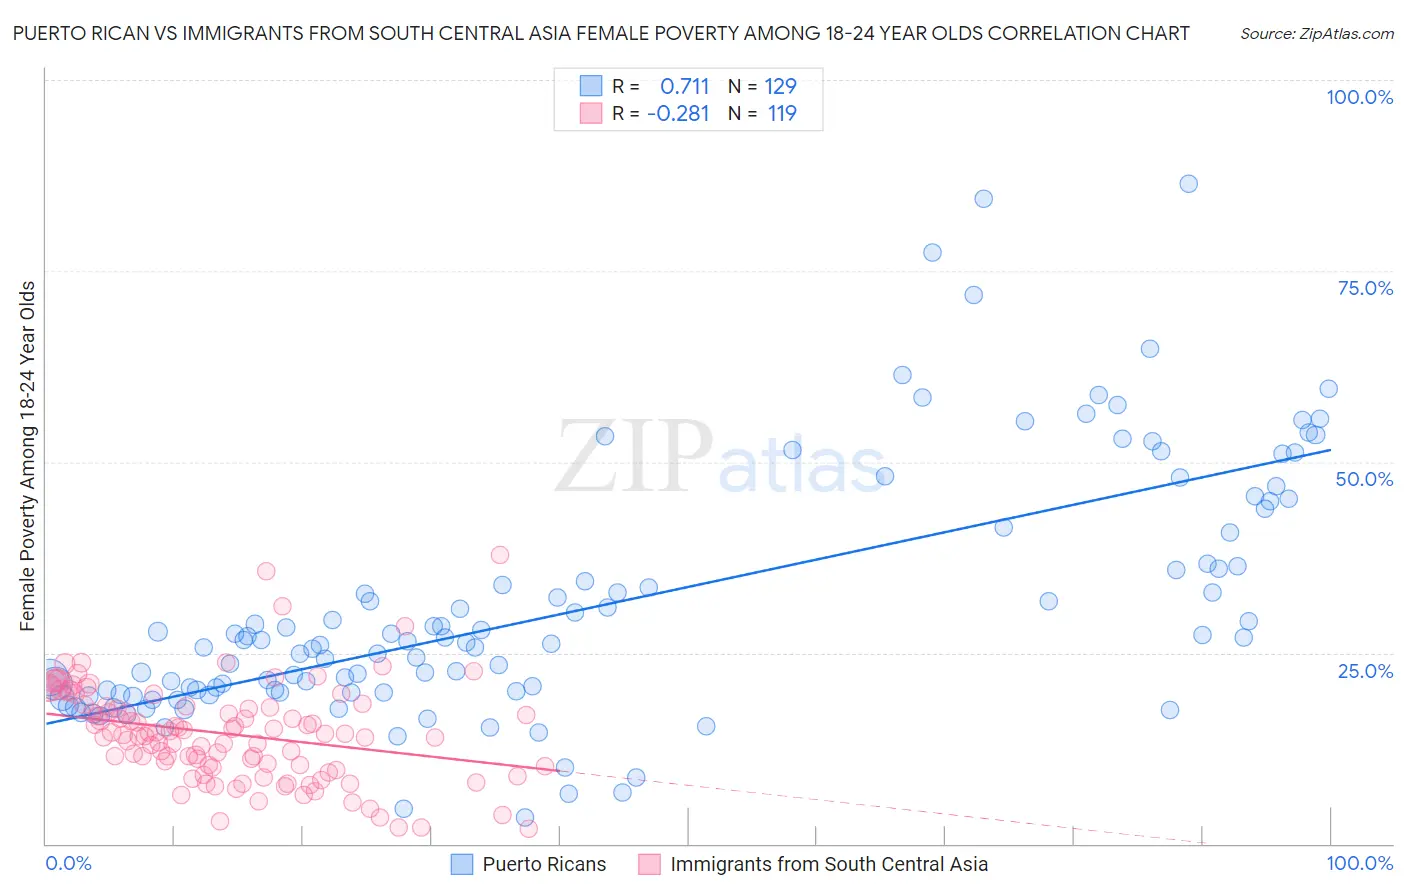 Puerto Rican vs Immigrants from South Central Asia Female Poverty Among 18-24 Year Olds